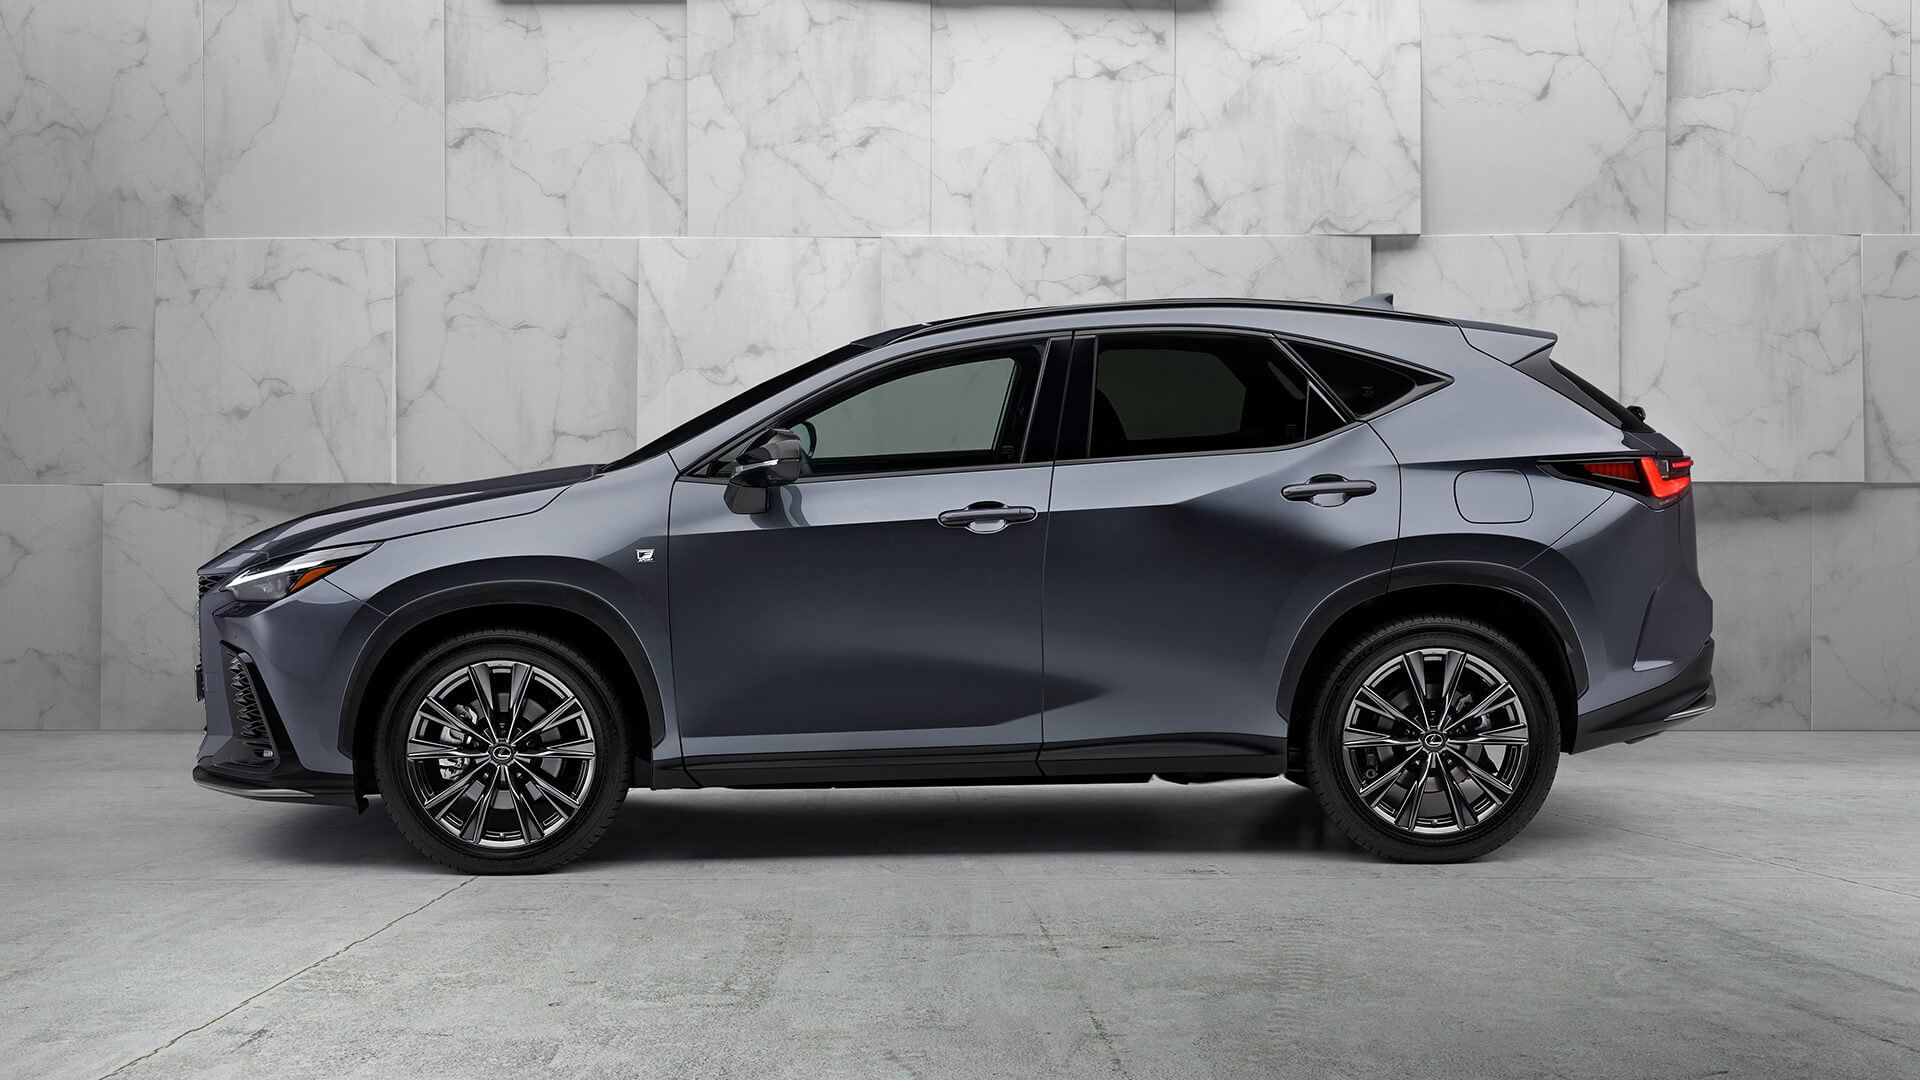 Side view of the Lexus NX 450h+